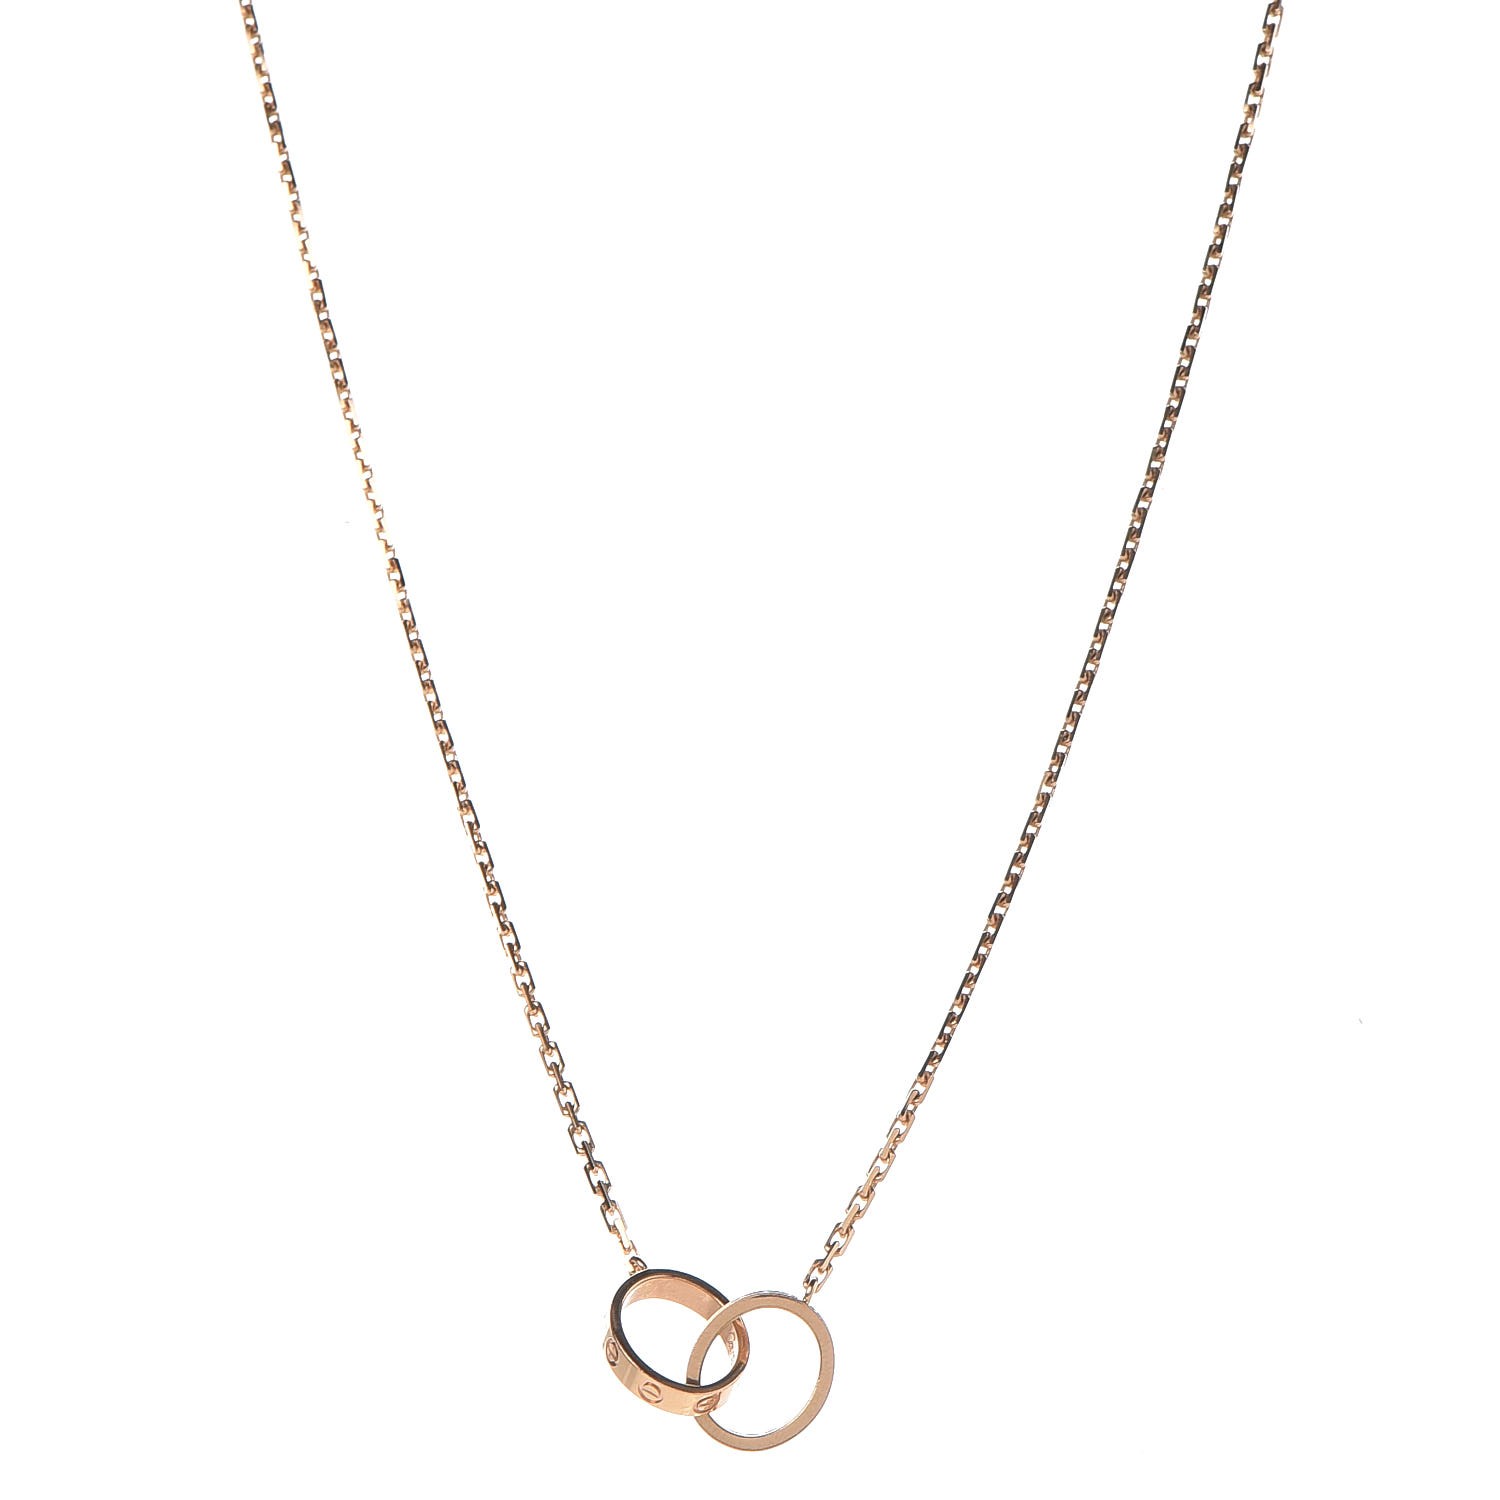 cartier love necklace rose gold price